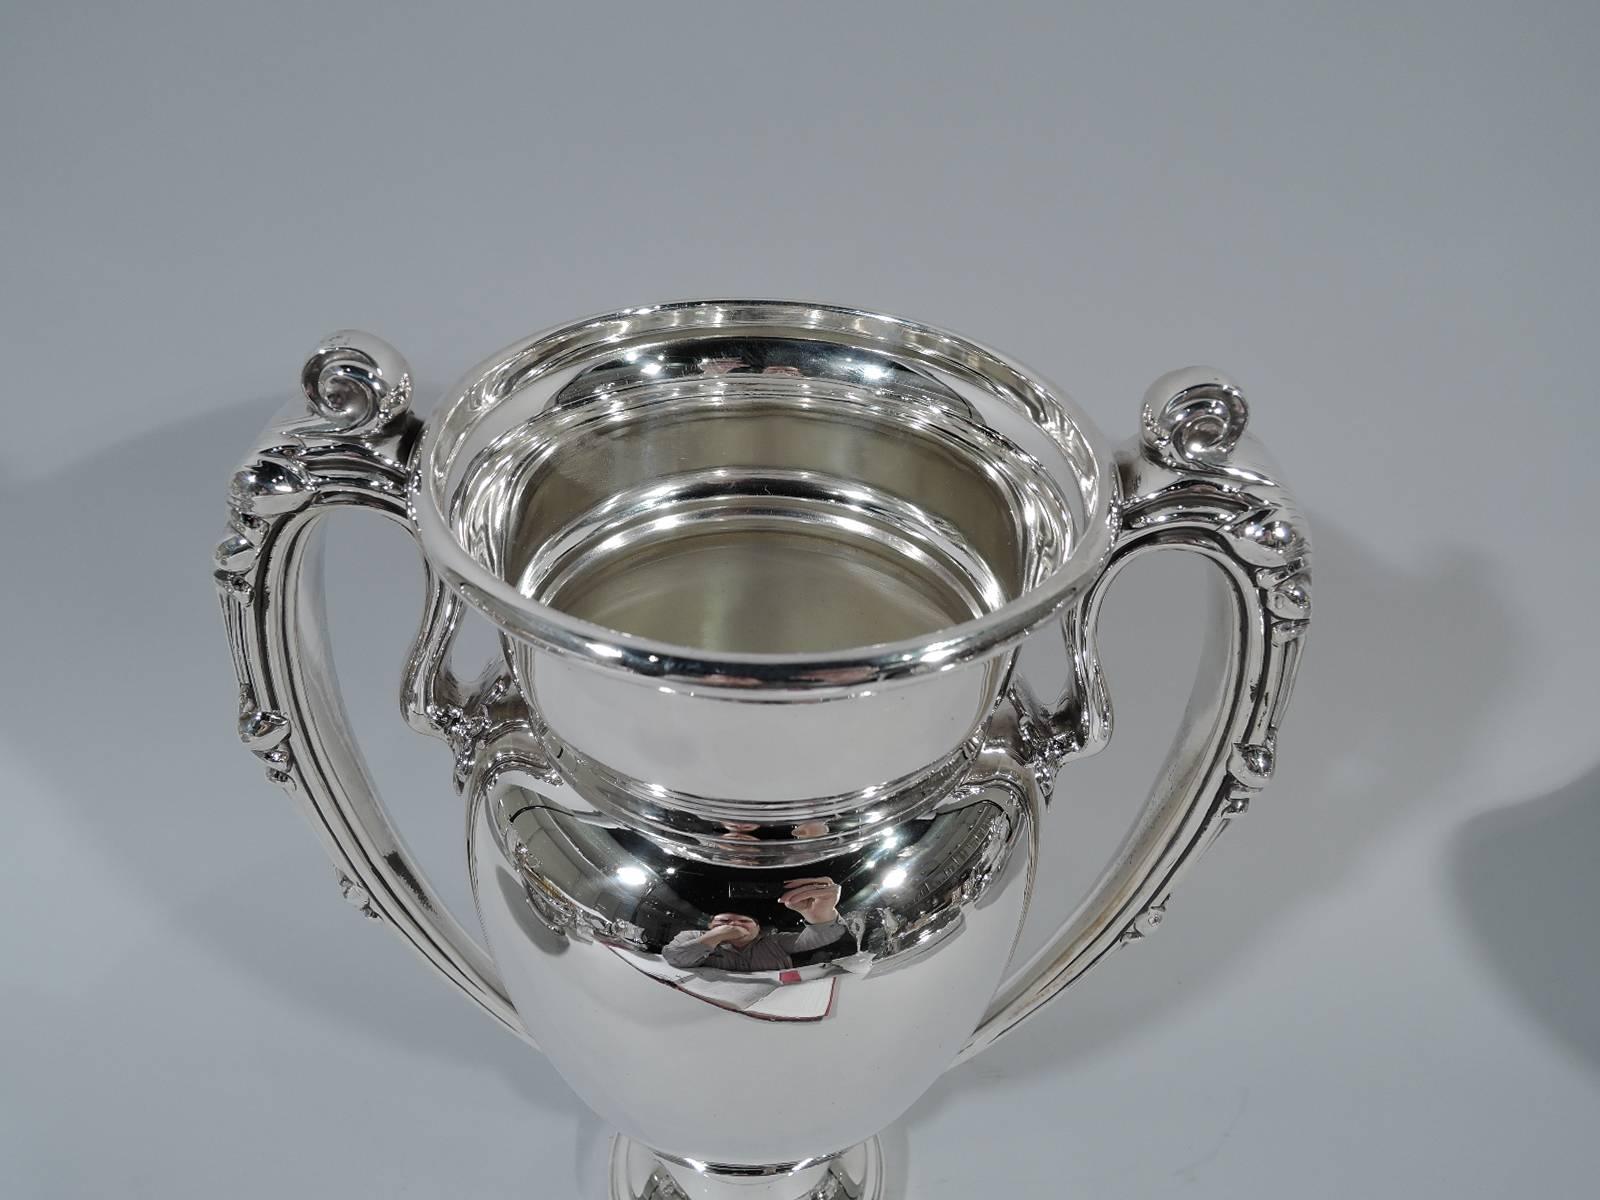 Sterling silver trophy cup. Made by Meriden Britannia (part of International) in Meriden, Conn., circa 1910. Amphora with reeded and leaf-capped high-looping scroll handle and stepped and domed foot. Sleek classicism. Lots of room for engraving.